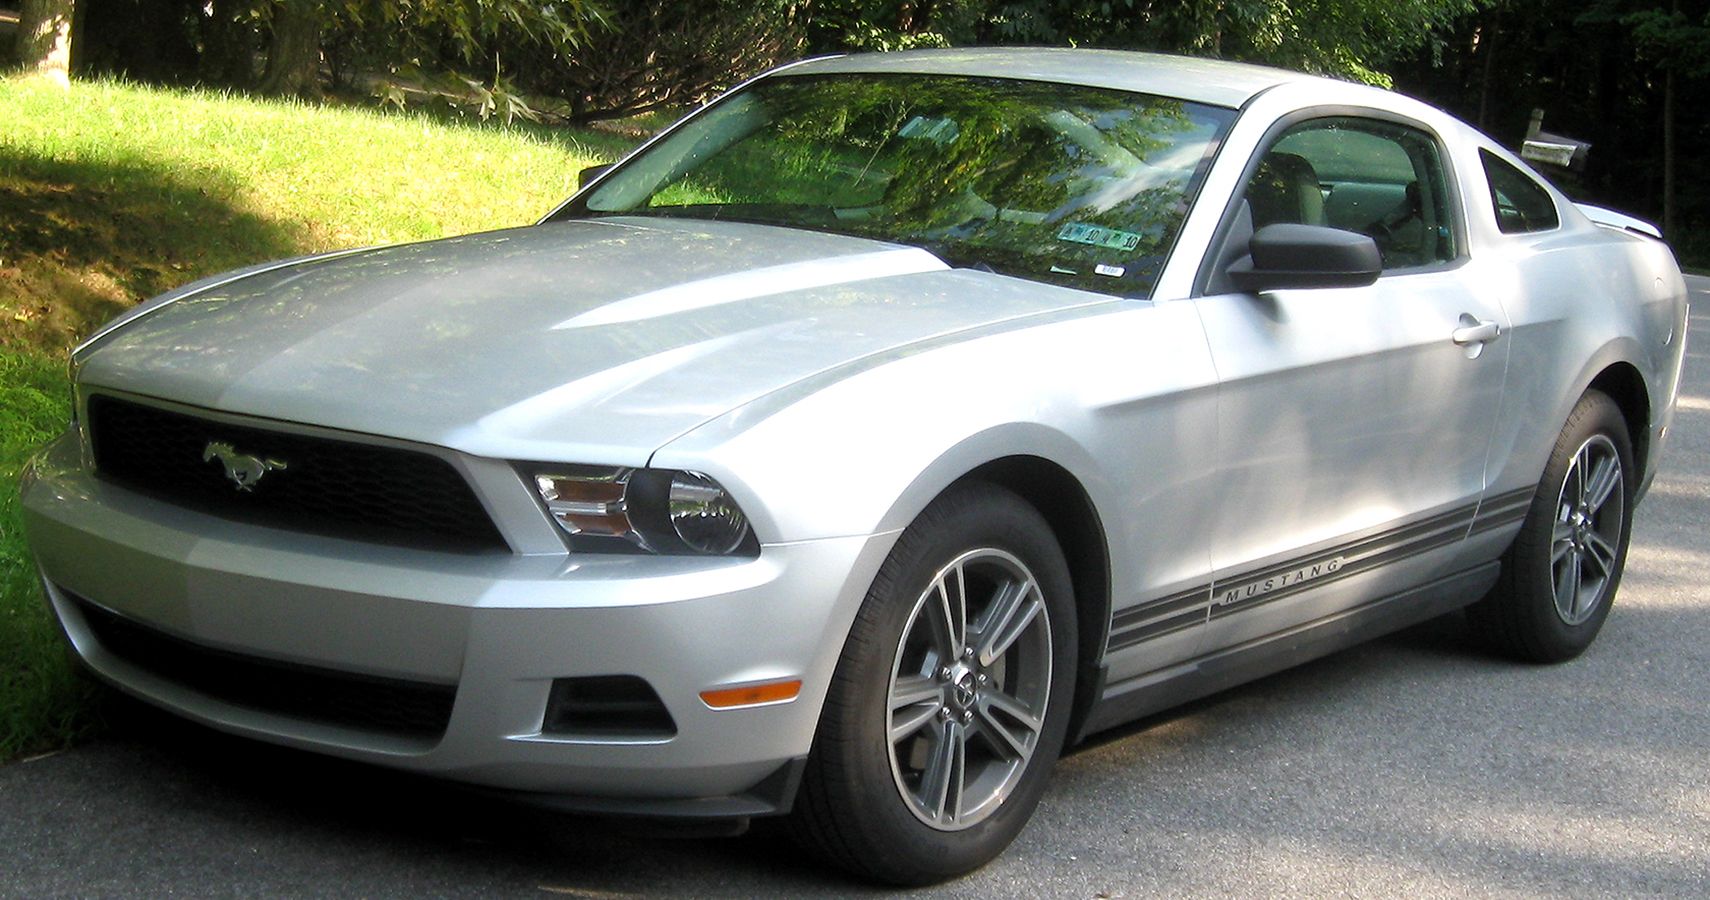 2010 Ford Mustang: Catfished By The Next Year’s Engines